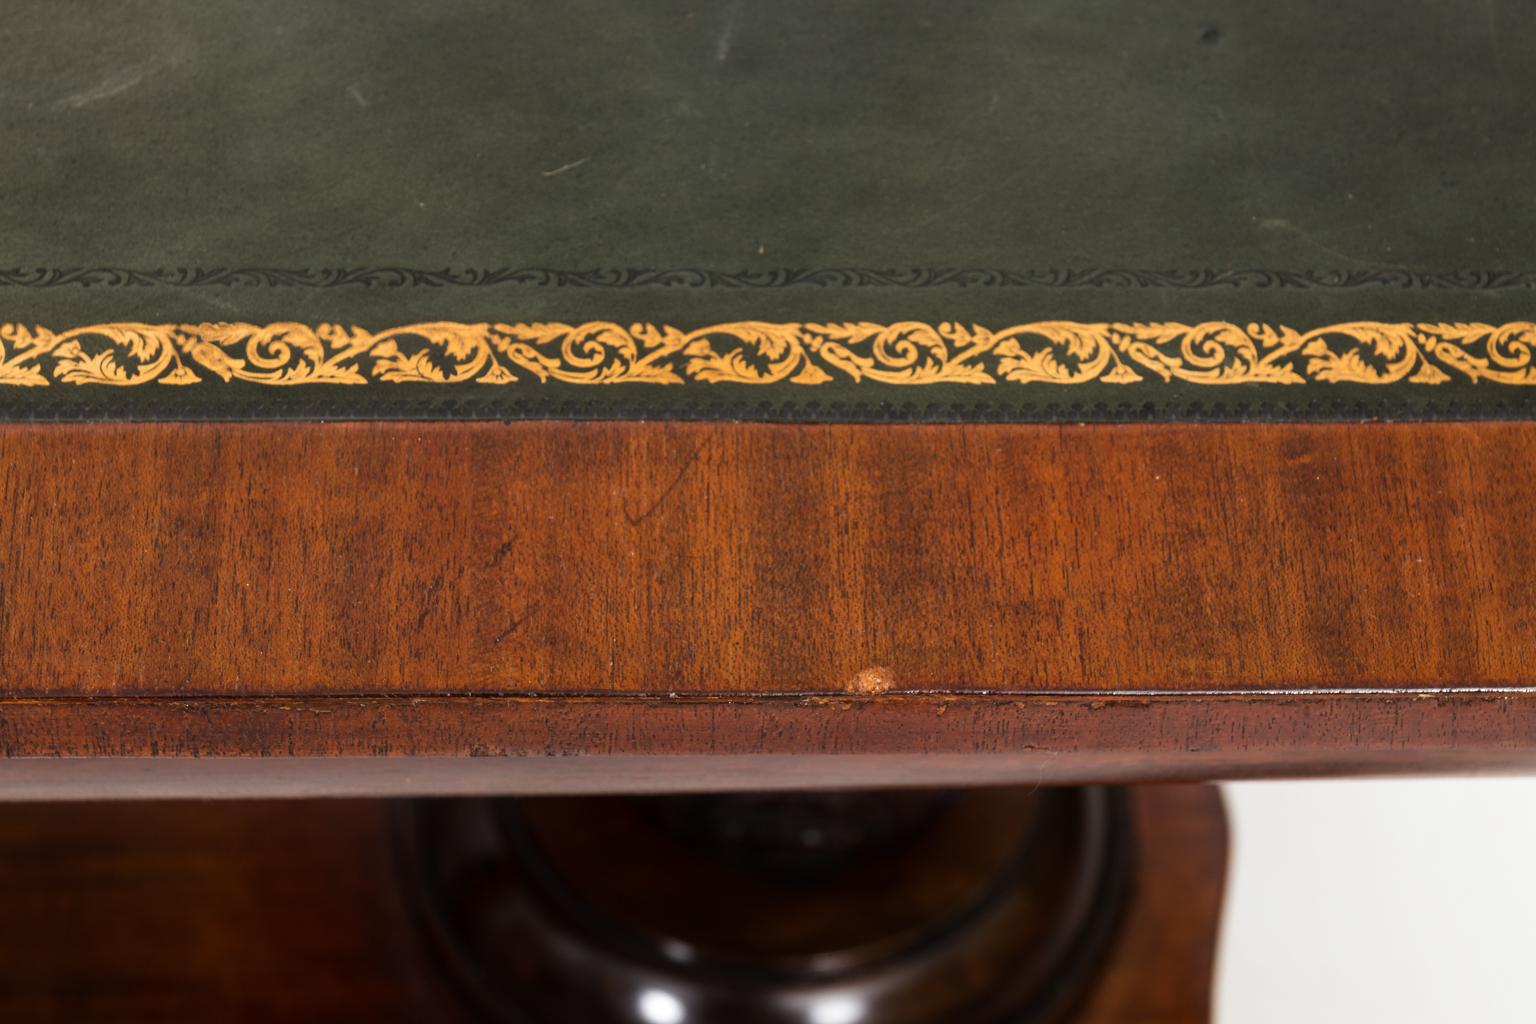 Continental style trestle base table with embossed leather top and one drawer on carved S-scroll feet, circa 1800. Please note of minor surface scratches on leather top.